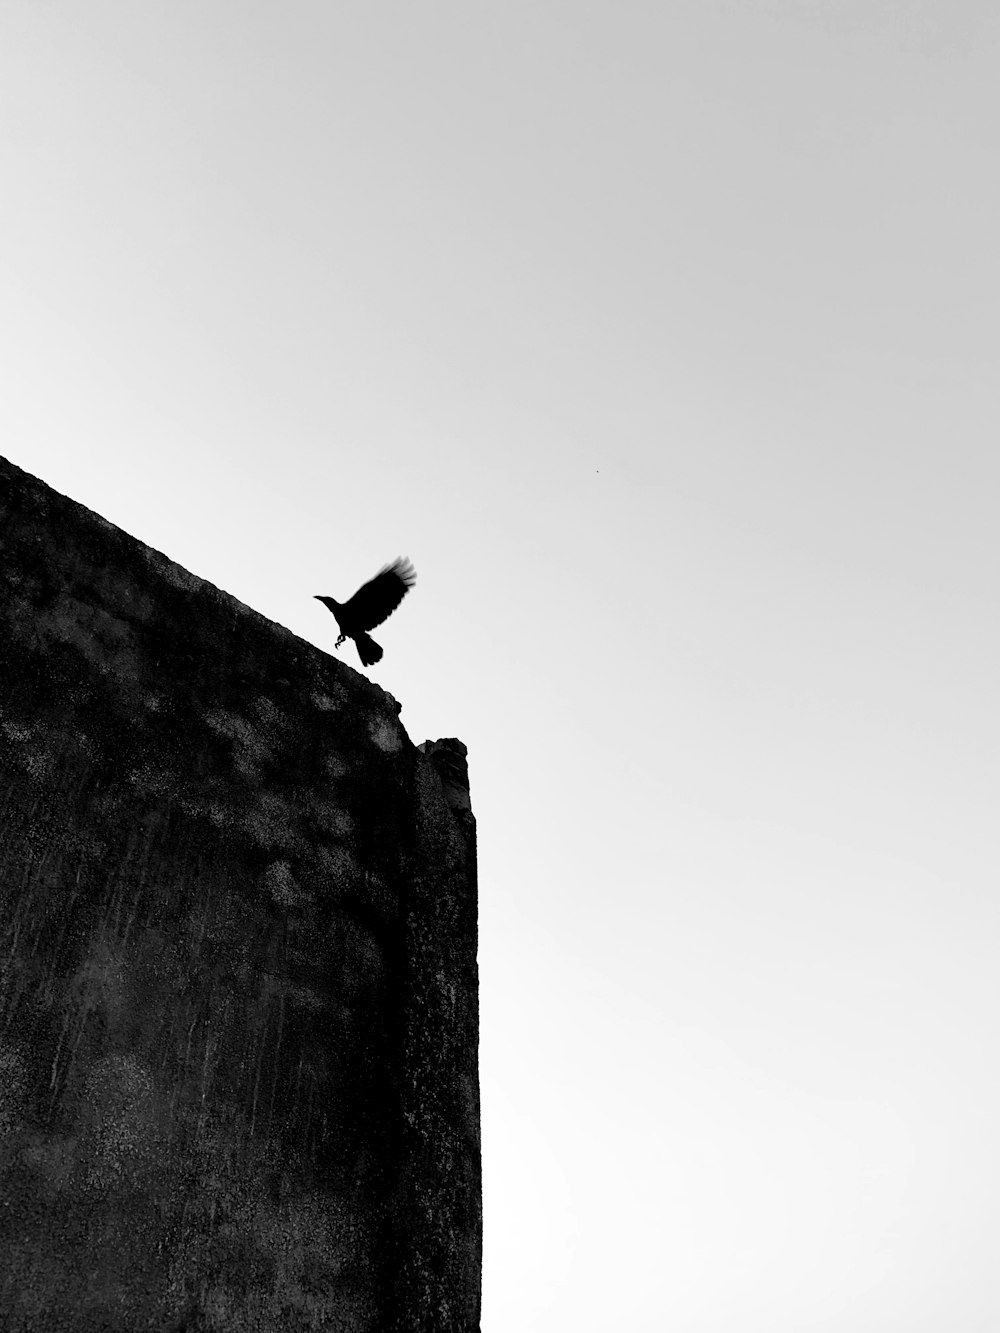 A flying crow about to sit on top of a building